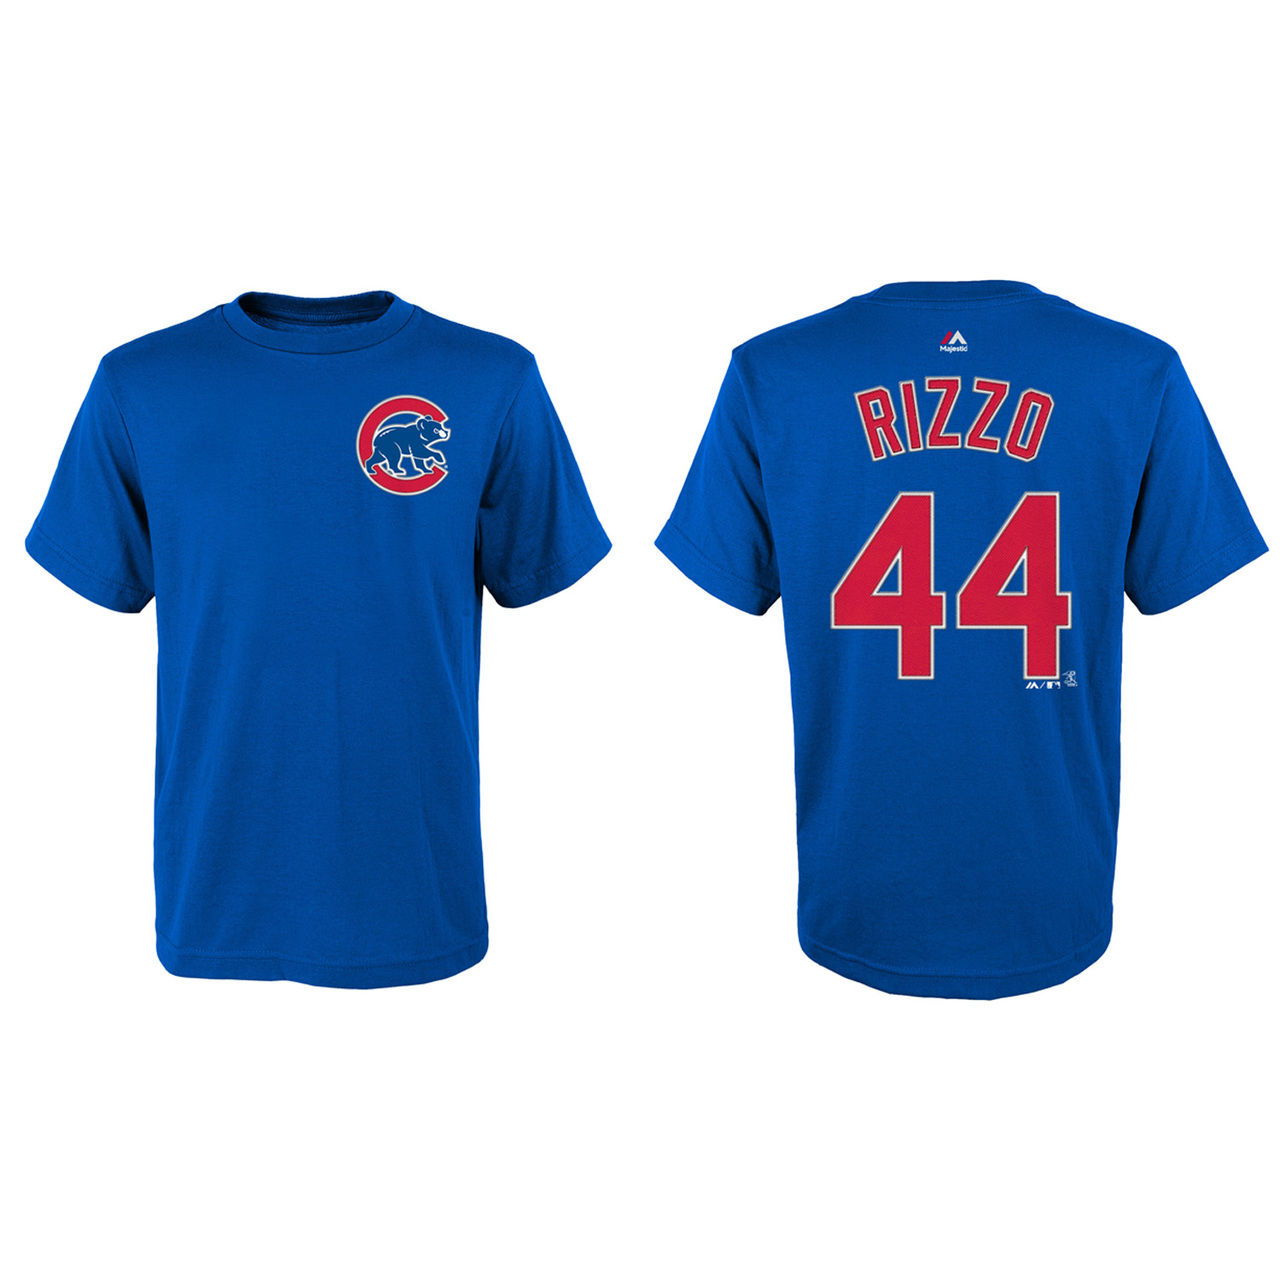 cubs youth t shirt